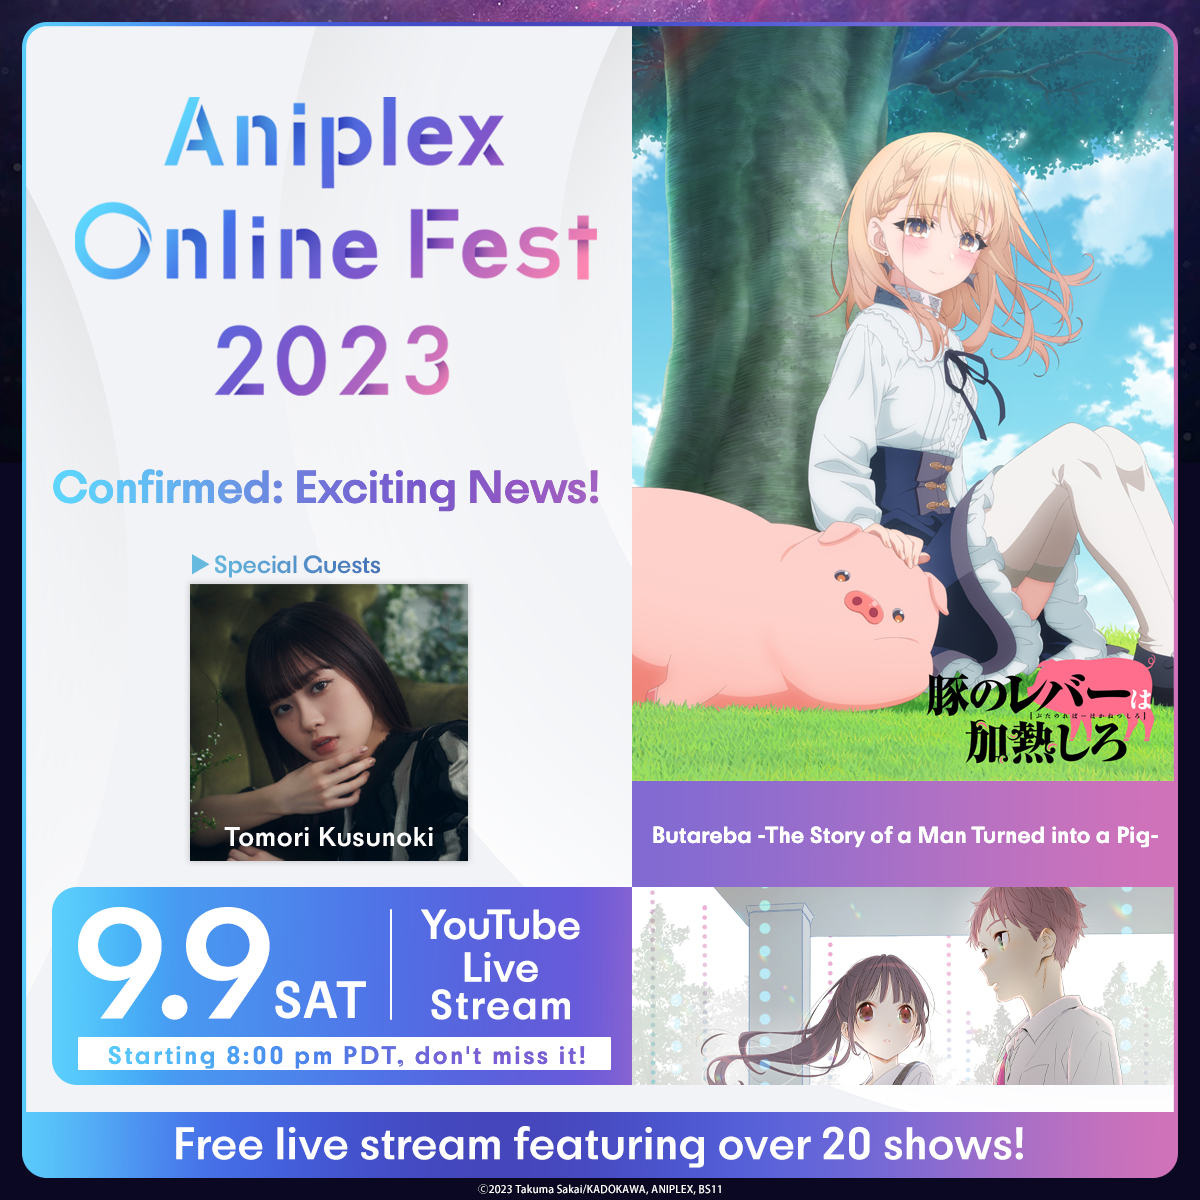 Anime Online Fest is live right now! There will be some news